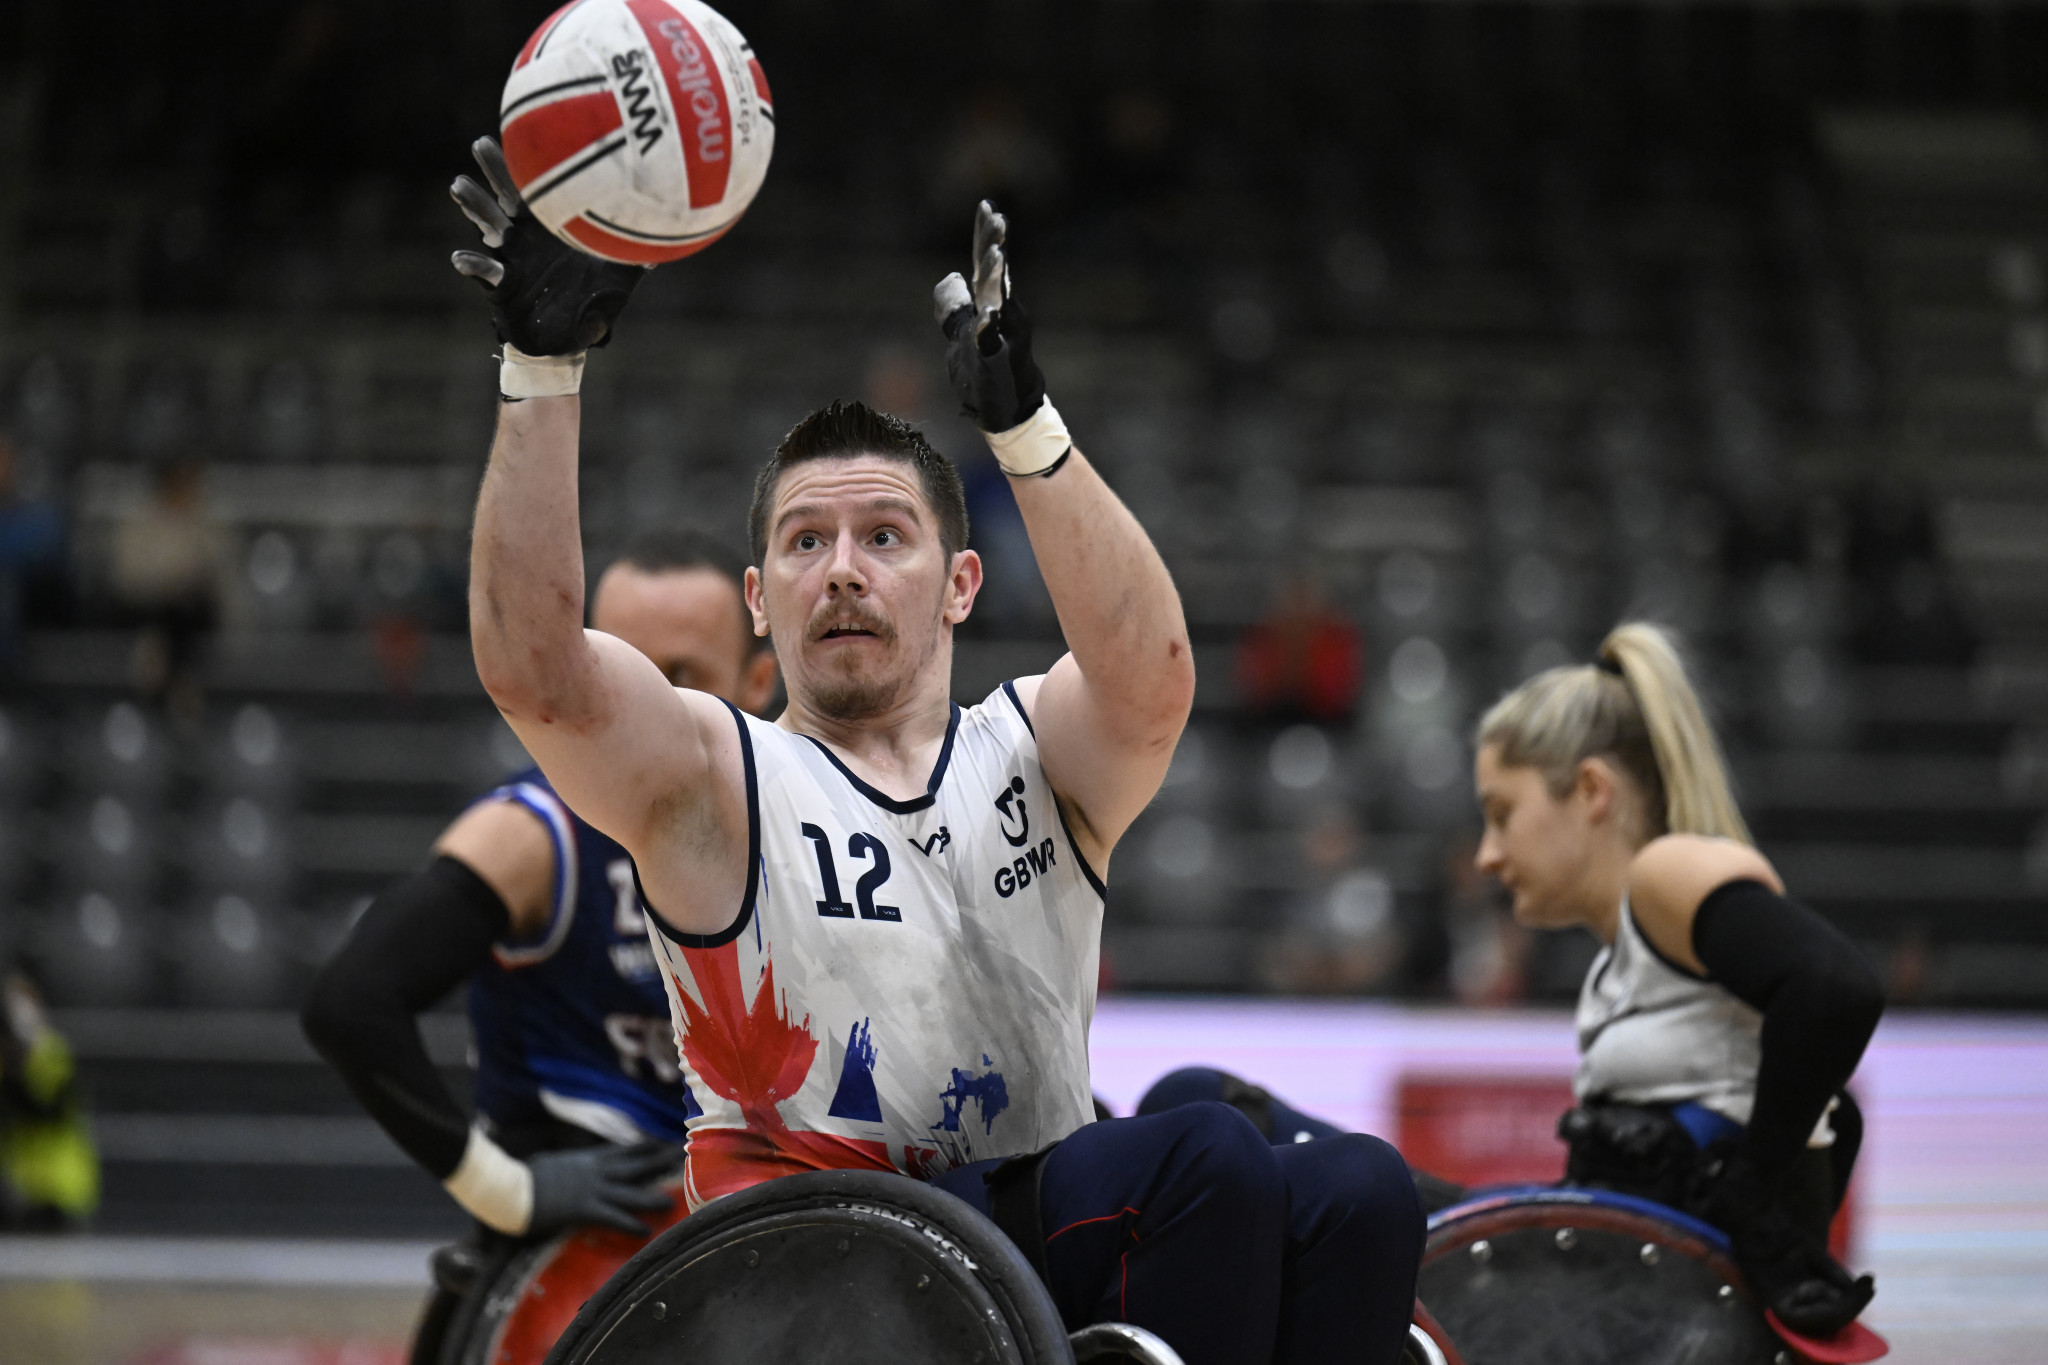 Paralympic champions Britain suffered a defeat to France in their placement fixture ©Lars Møller/Parasport Denmark